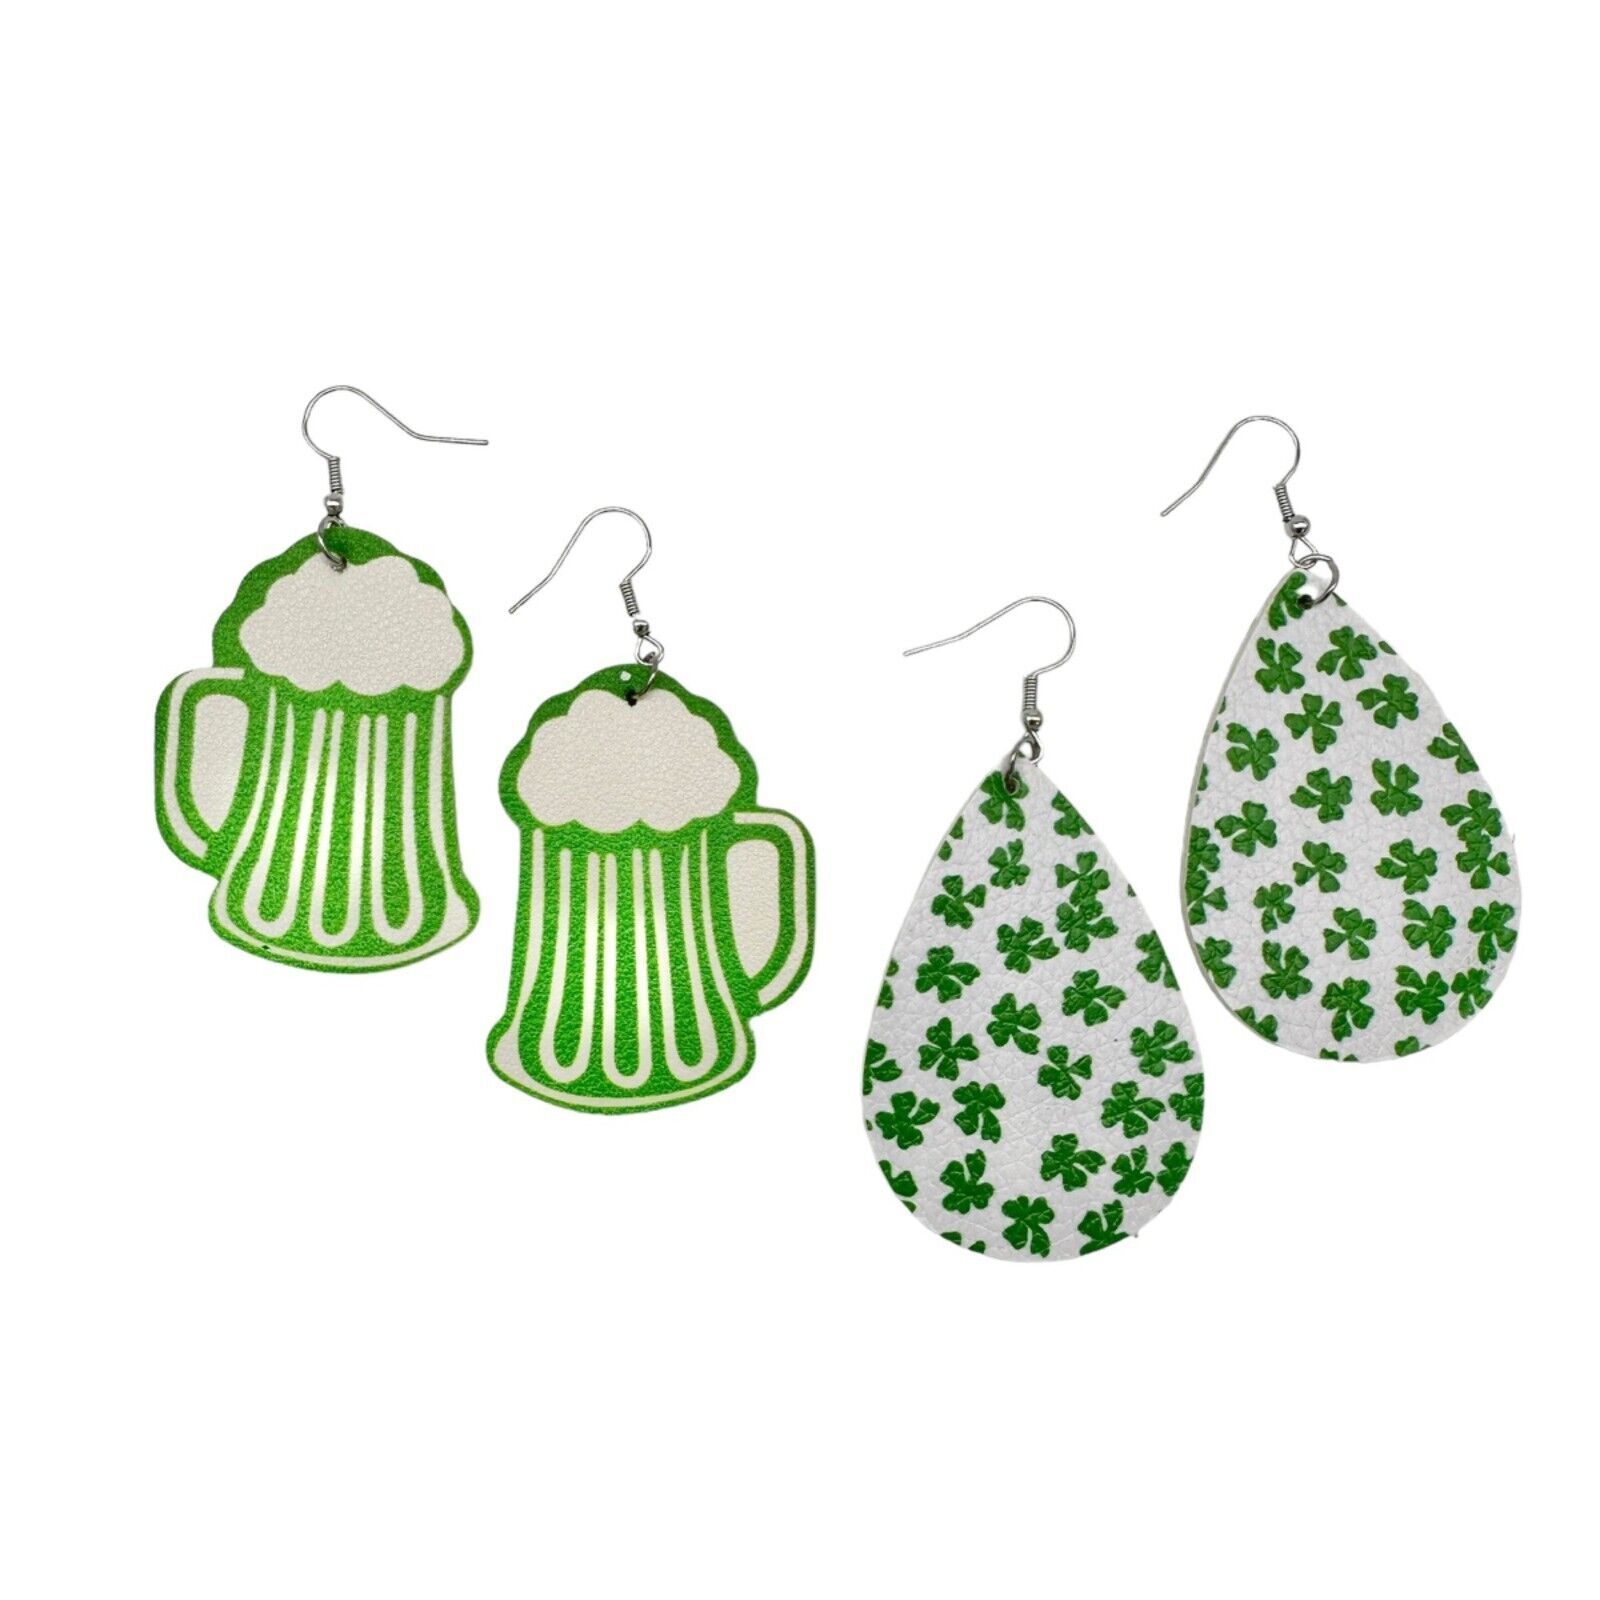 Two Pairs of St. Patrick's Day Earrings 1 Beer Mug 1 Teardrop Green White NEW - $7.92